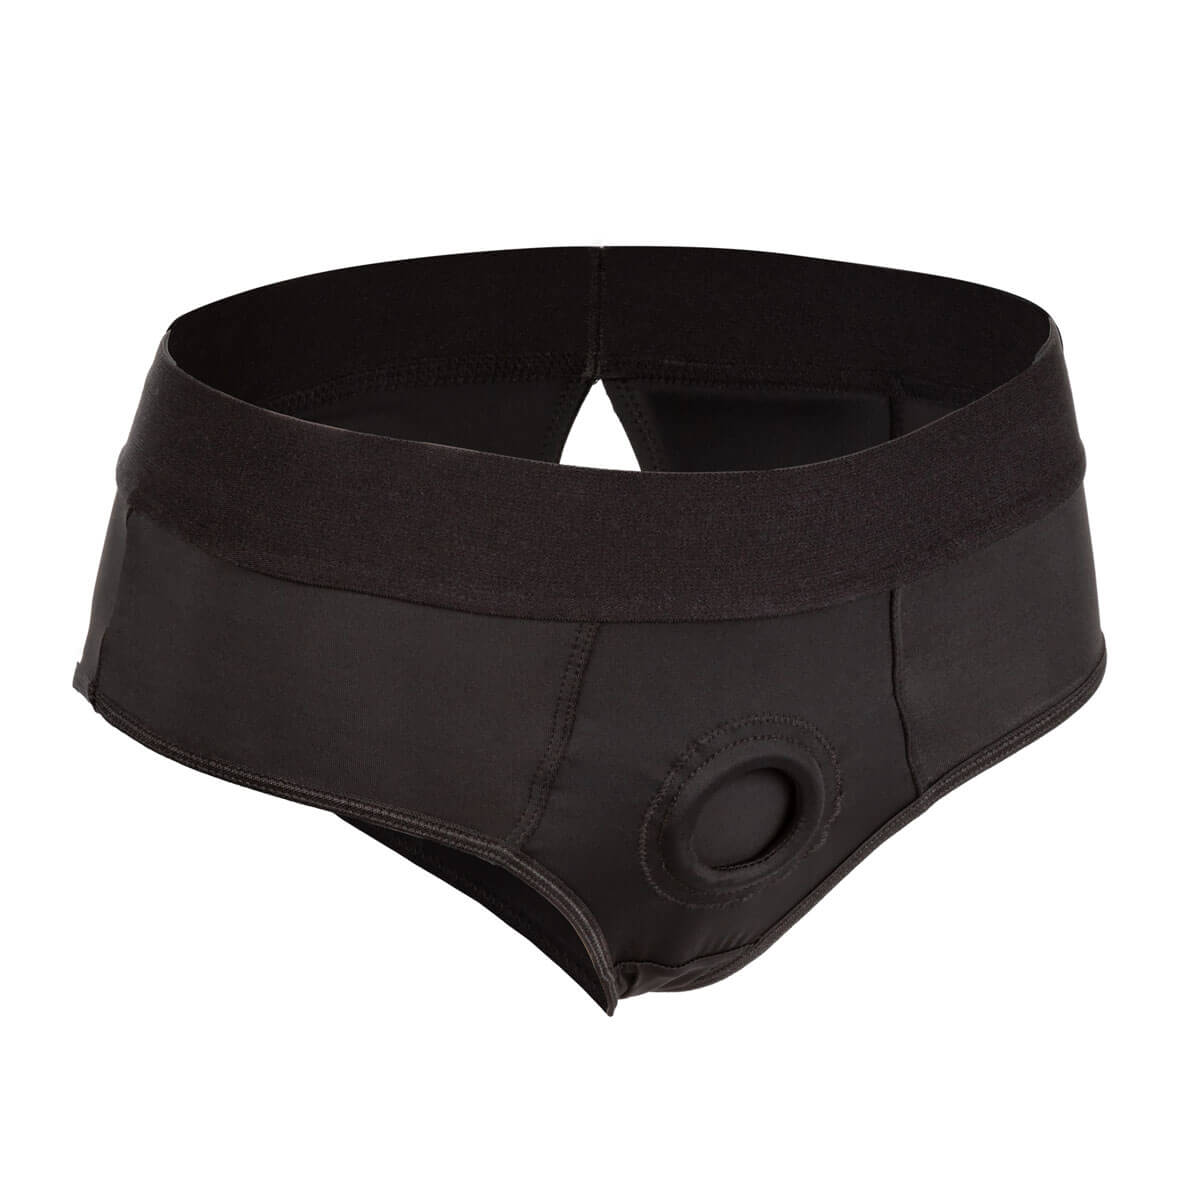 Black cotton briefs with a o-ring to use it as a harness Nudie Co